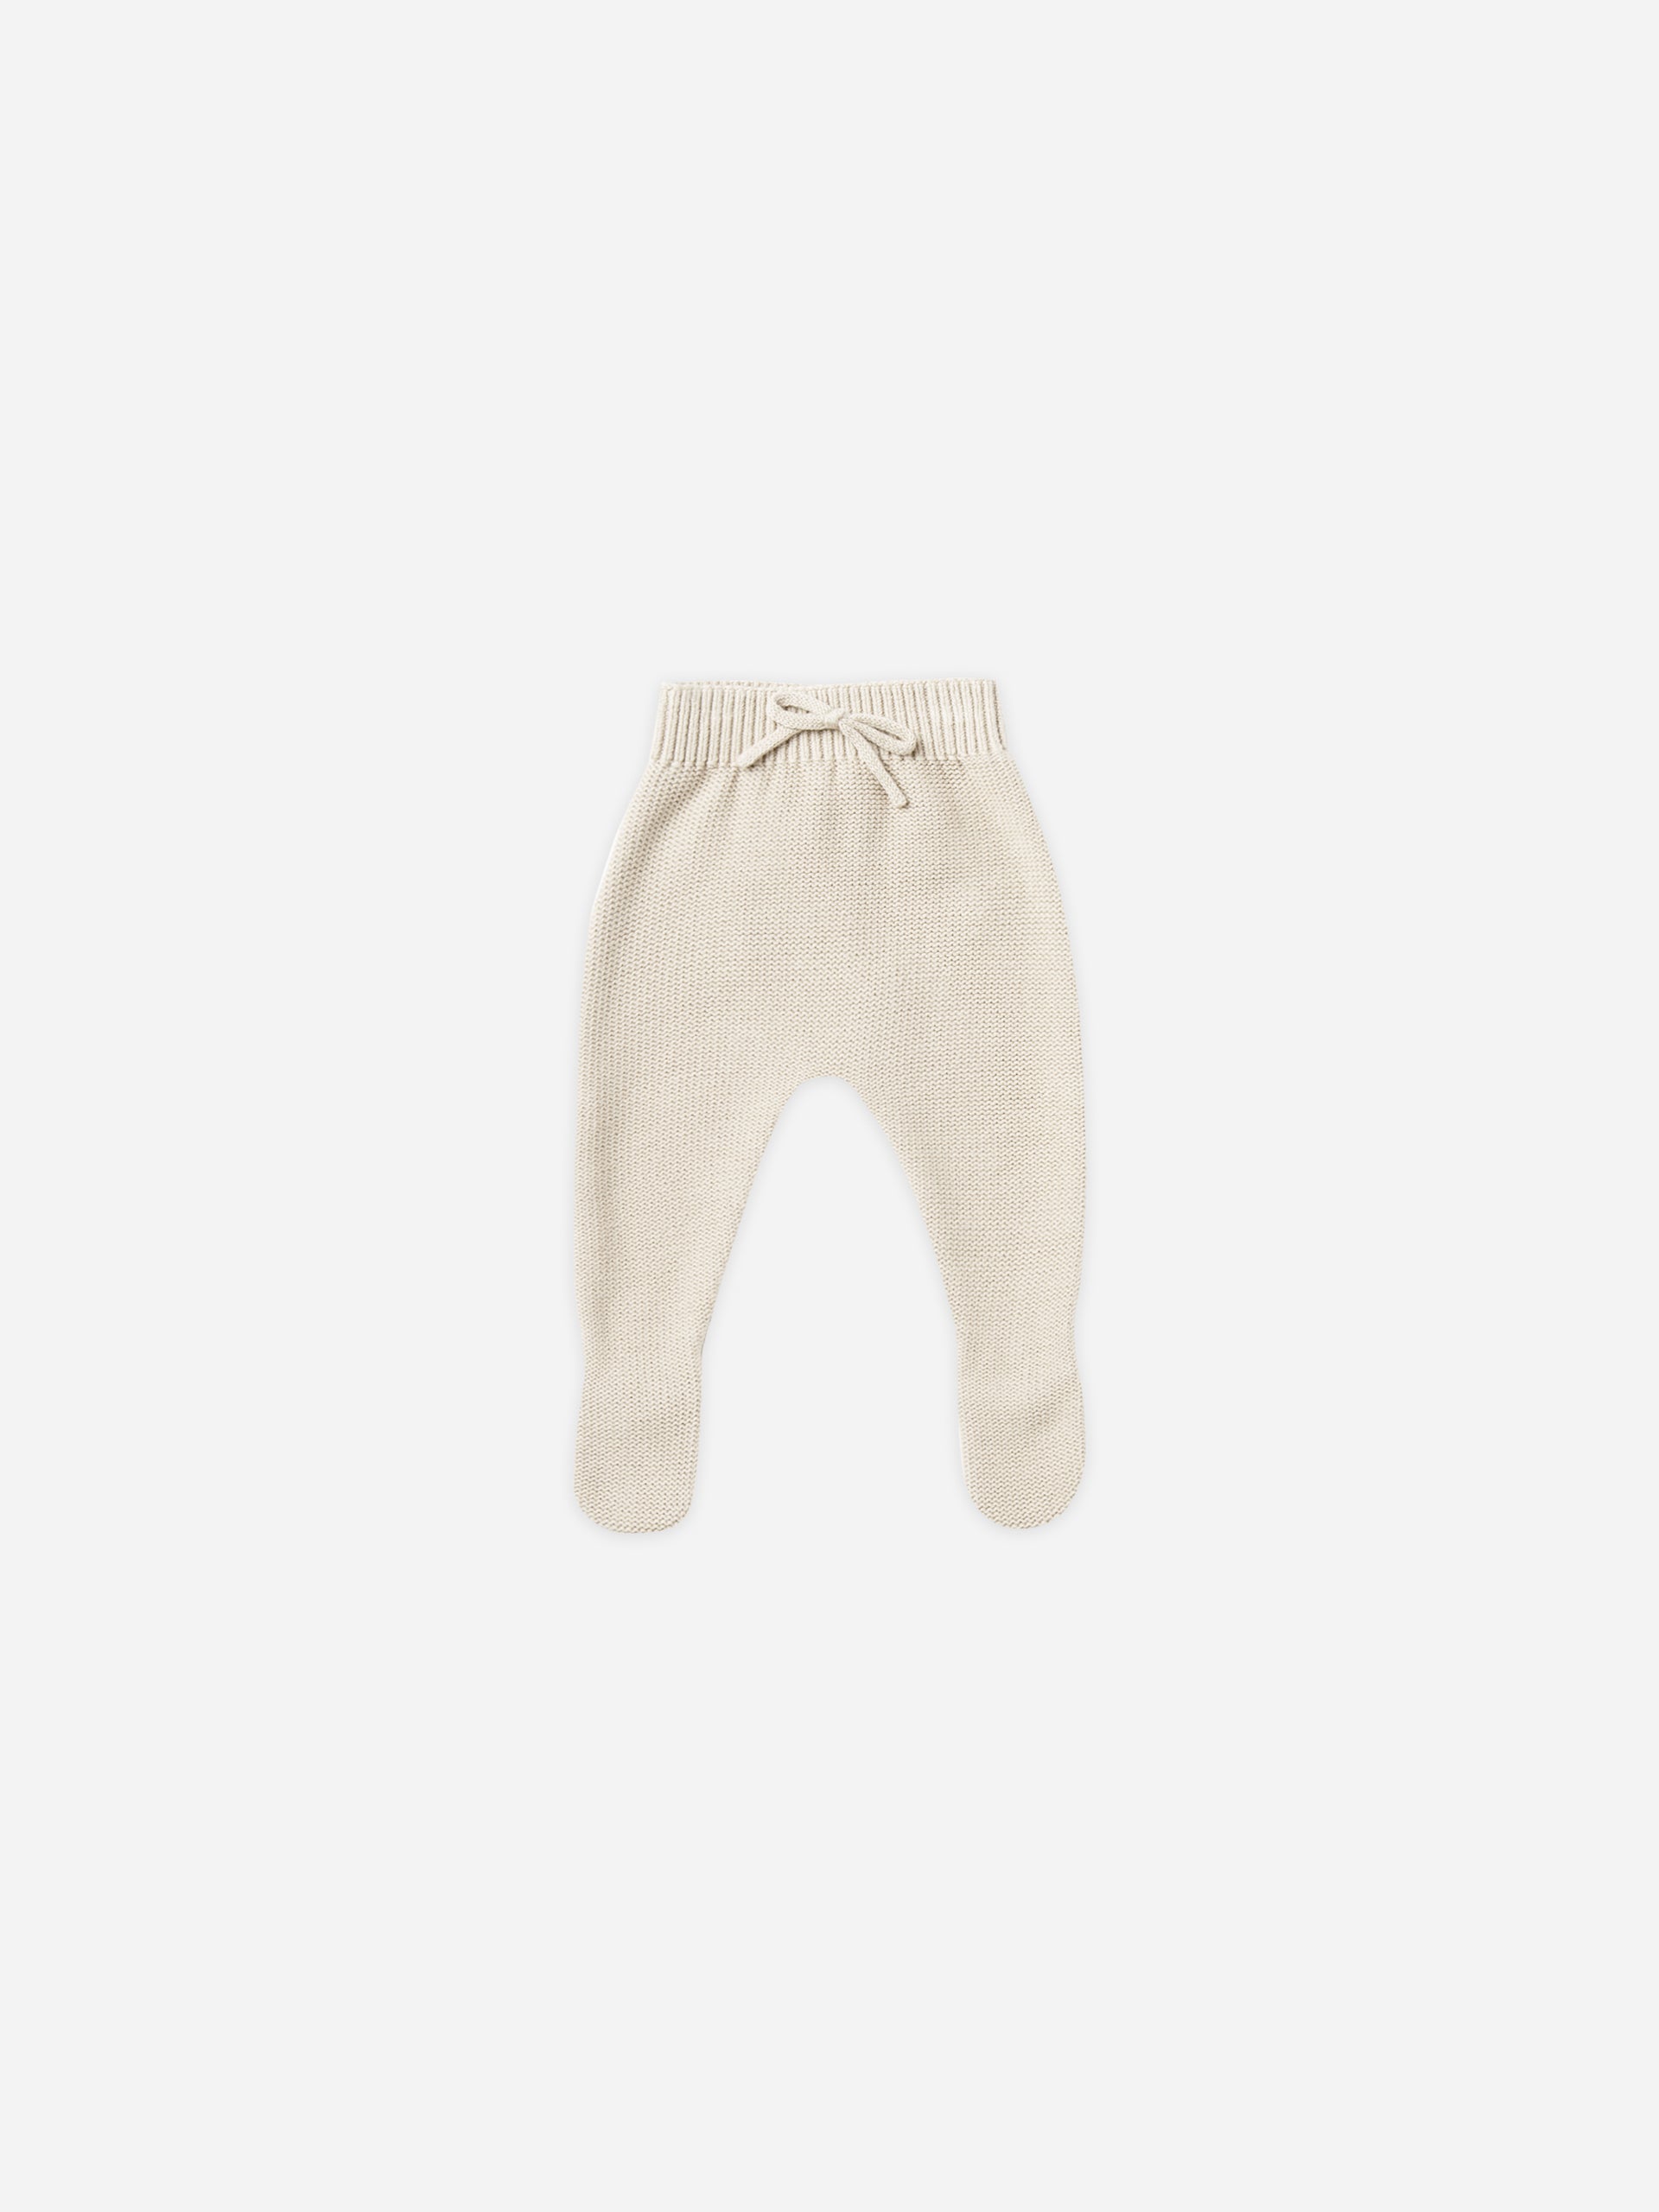 Footed Knit Pant || Natural - Rylee + Cru | Kids Clothes | Trendy Baby Clothes | Modern Infant Outfits |